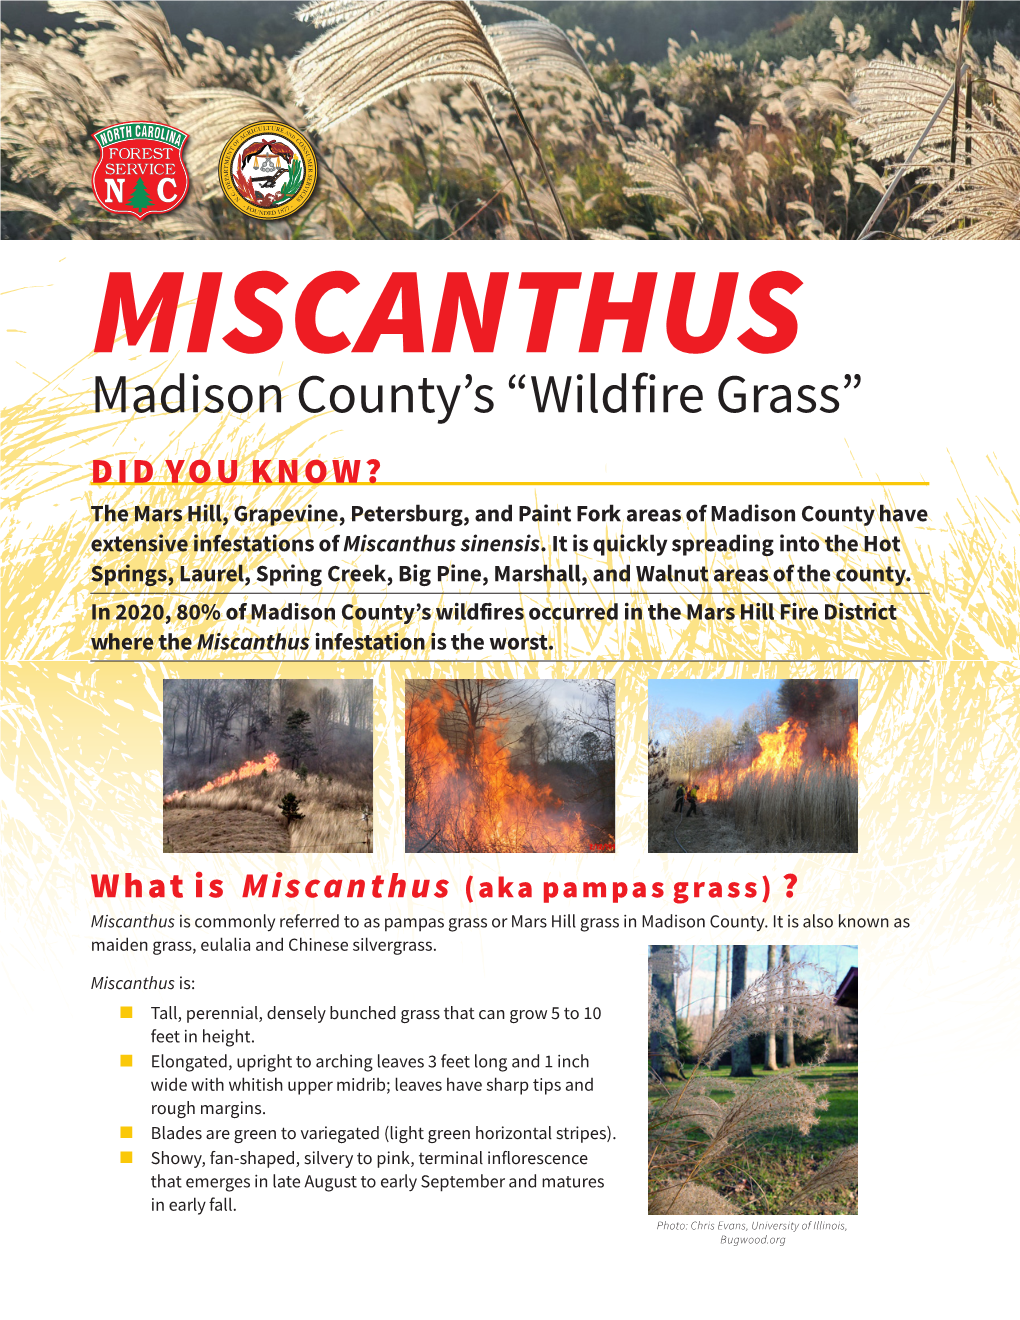 Miscanthus: Madison County's "Wildfire Grass"